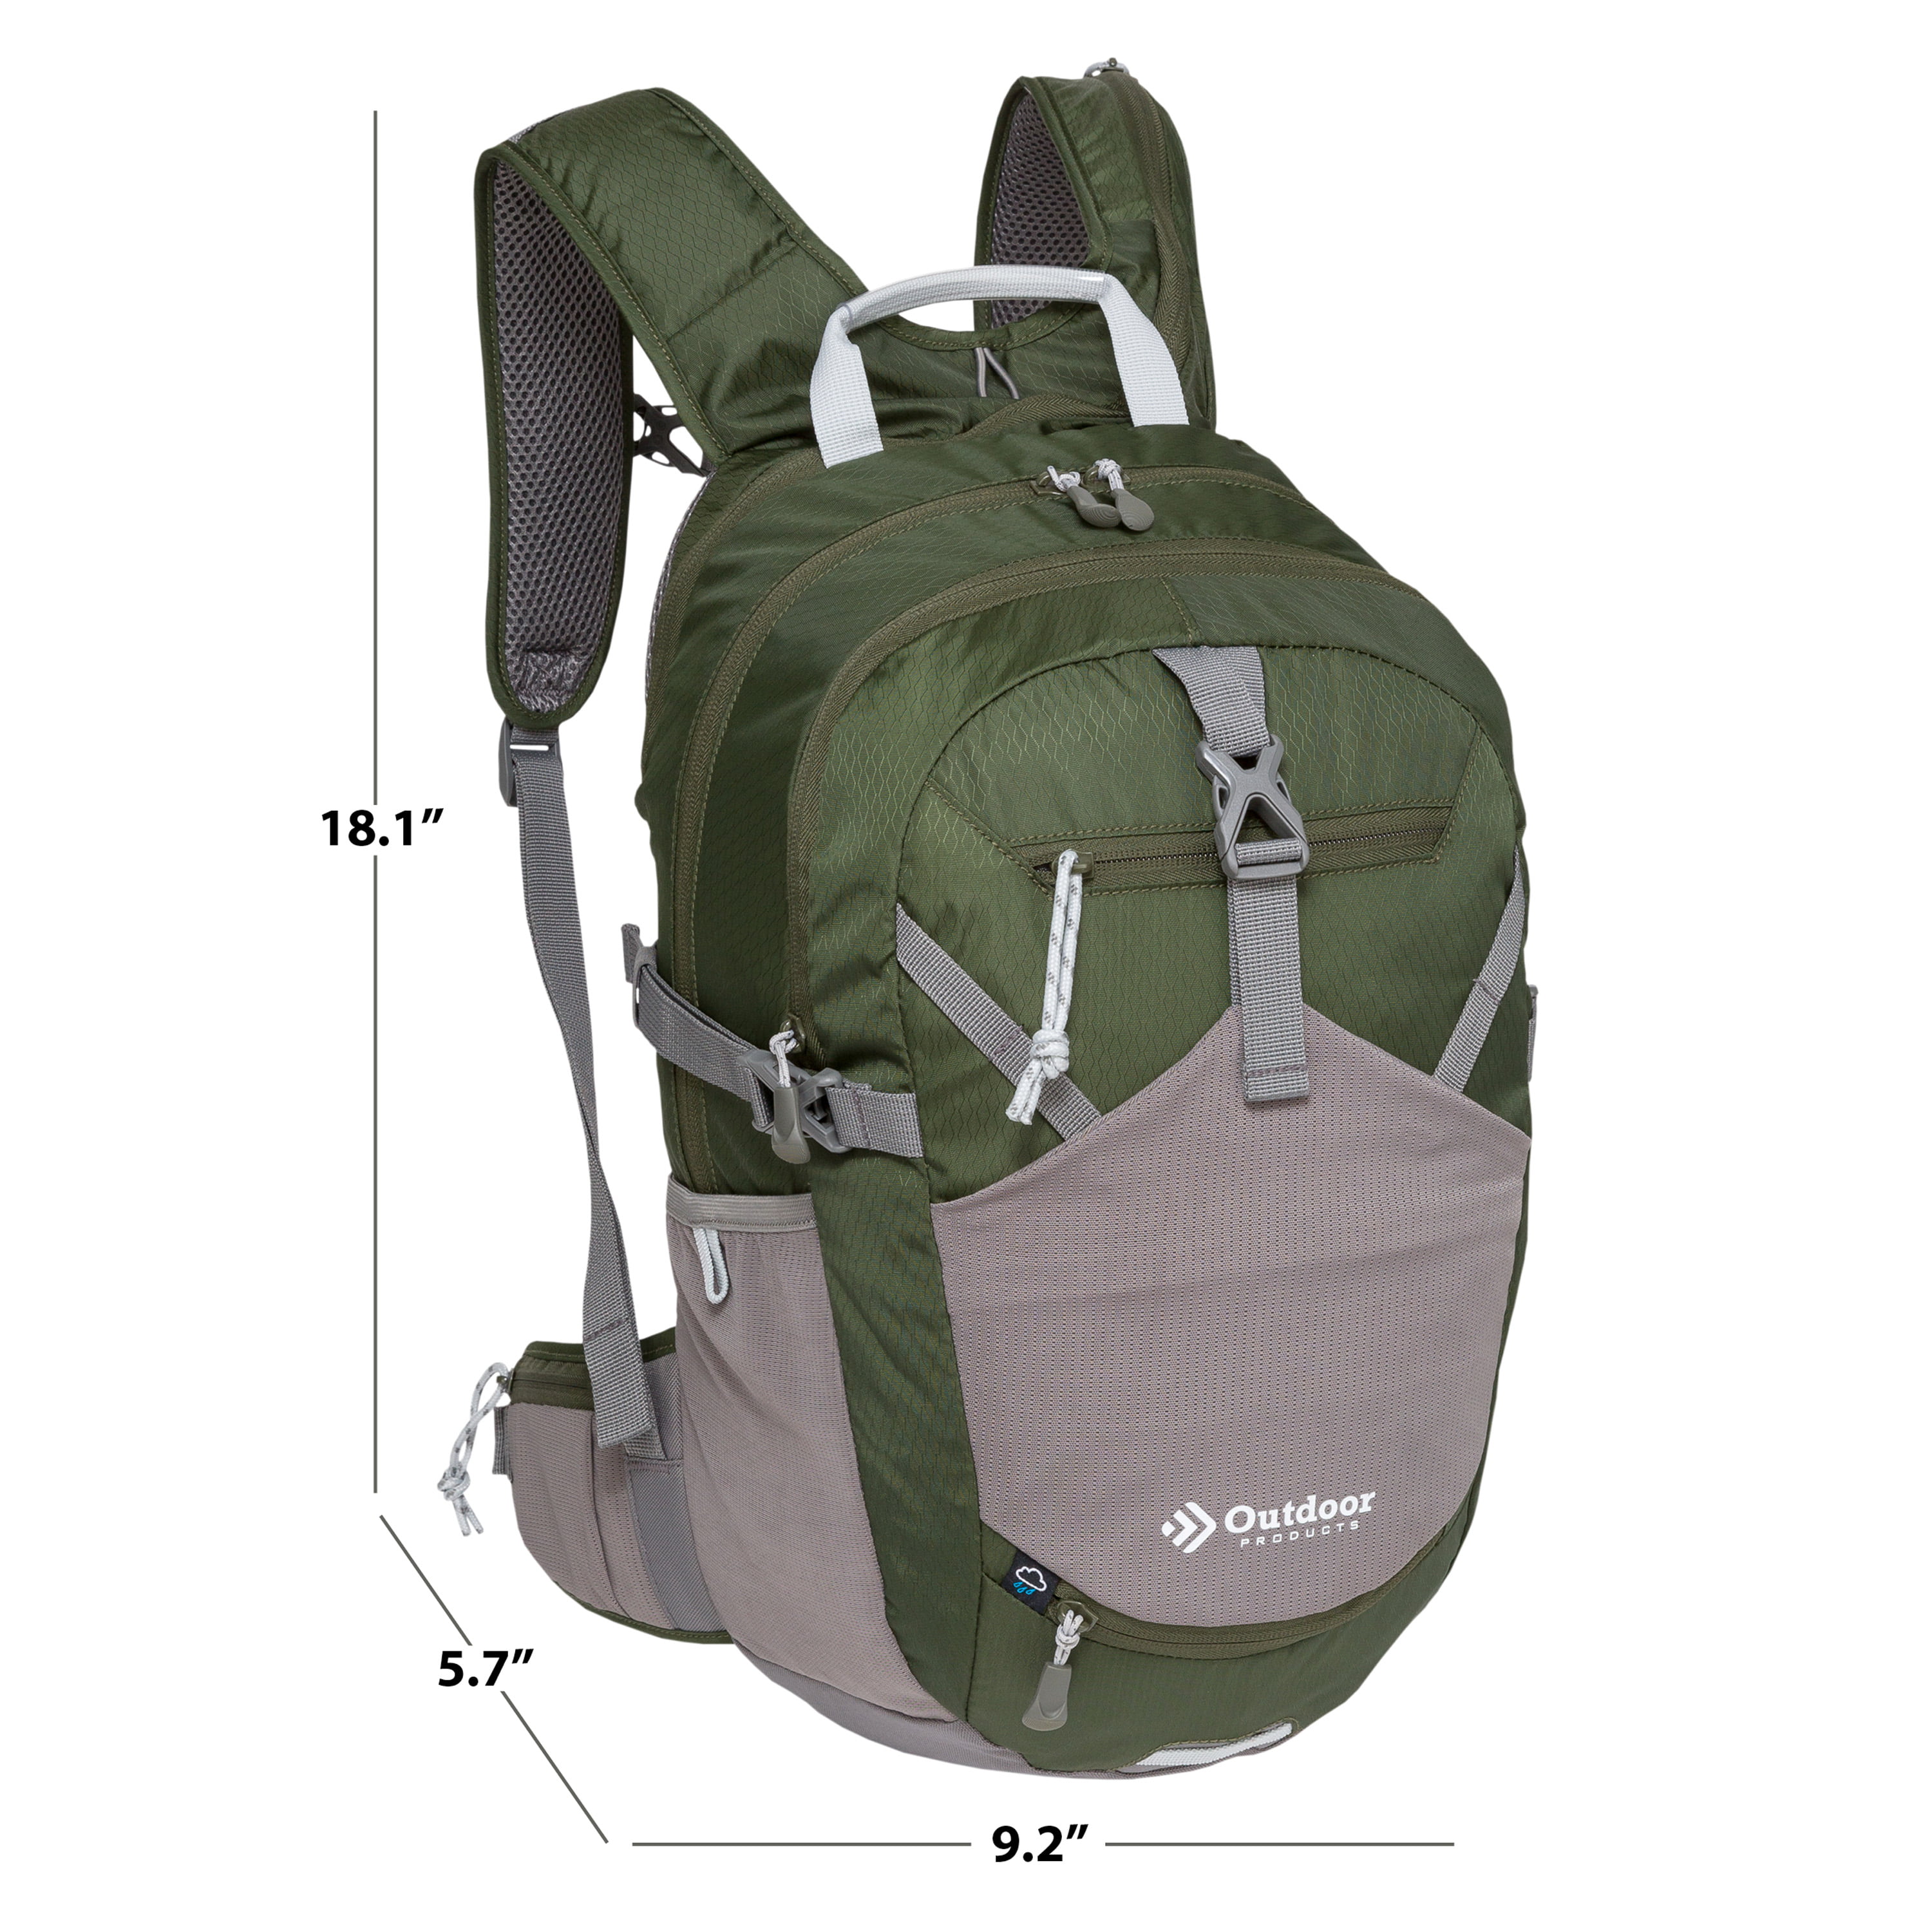 18L Hydration Pack with 3L Reservoir, Green